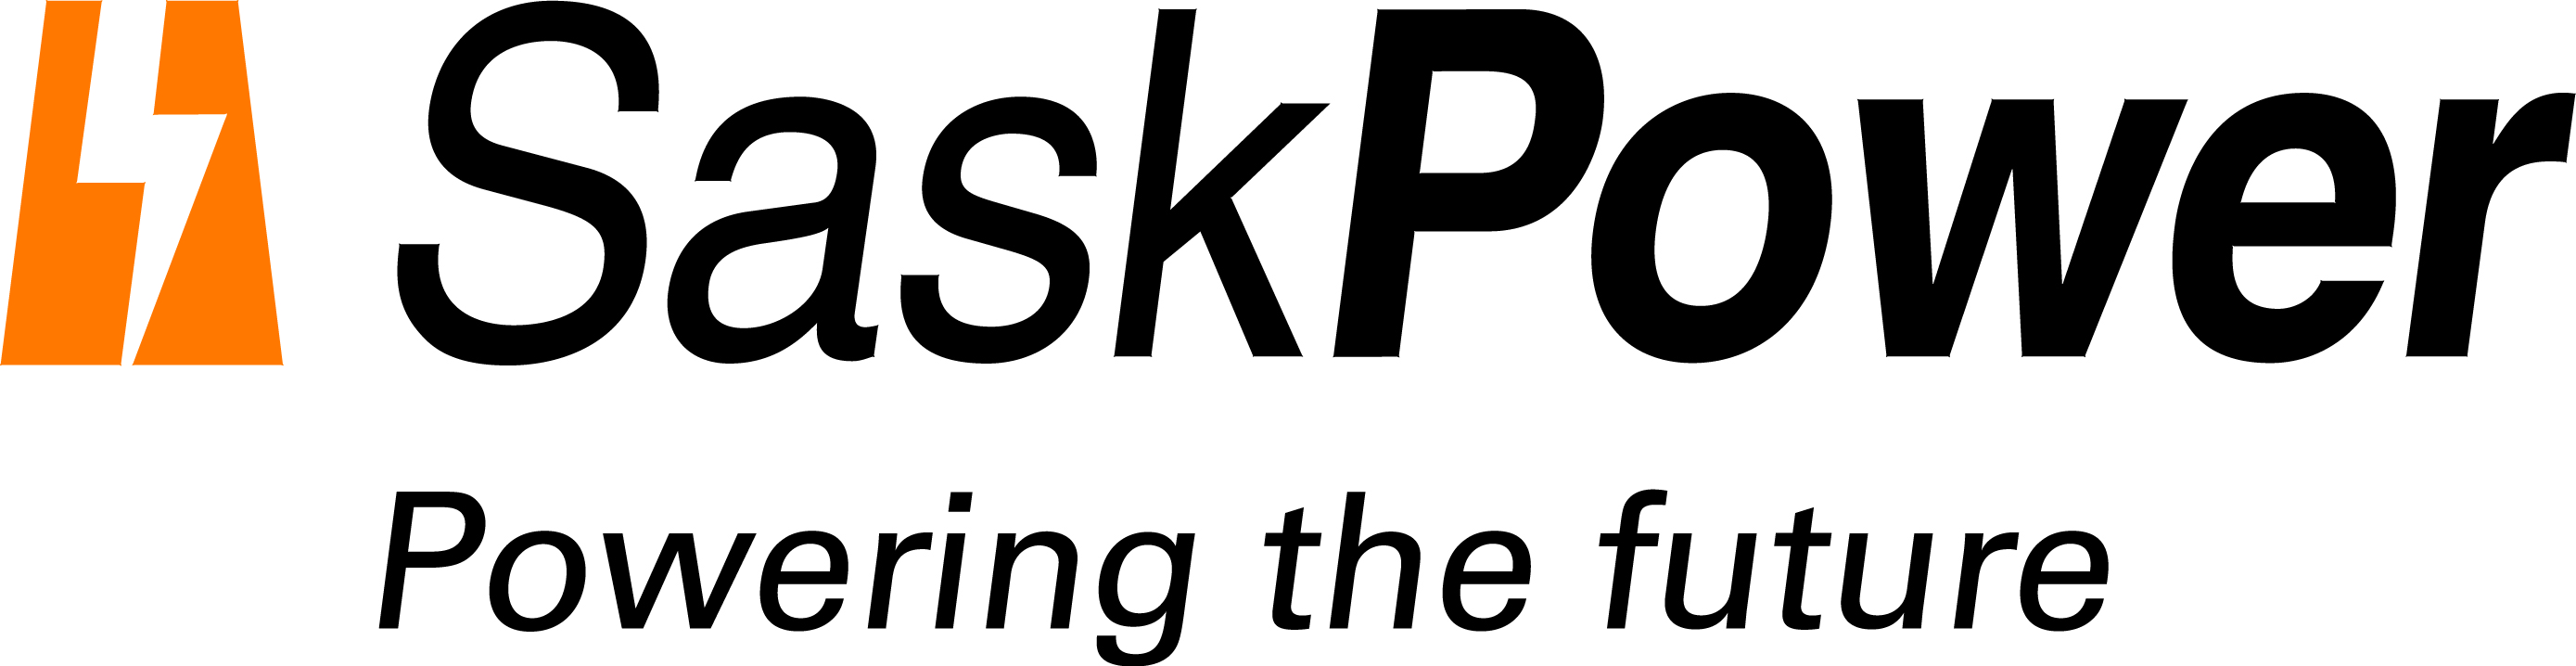 saskpower-careers-and-employment-ehscareers